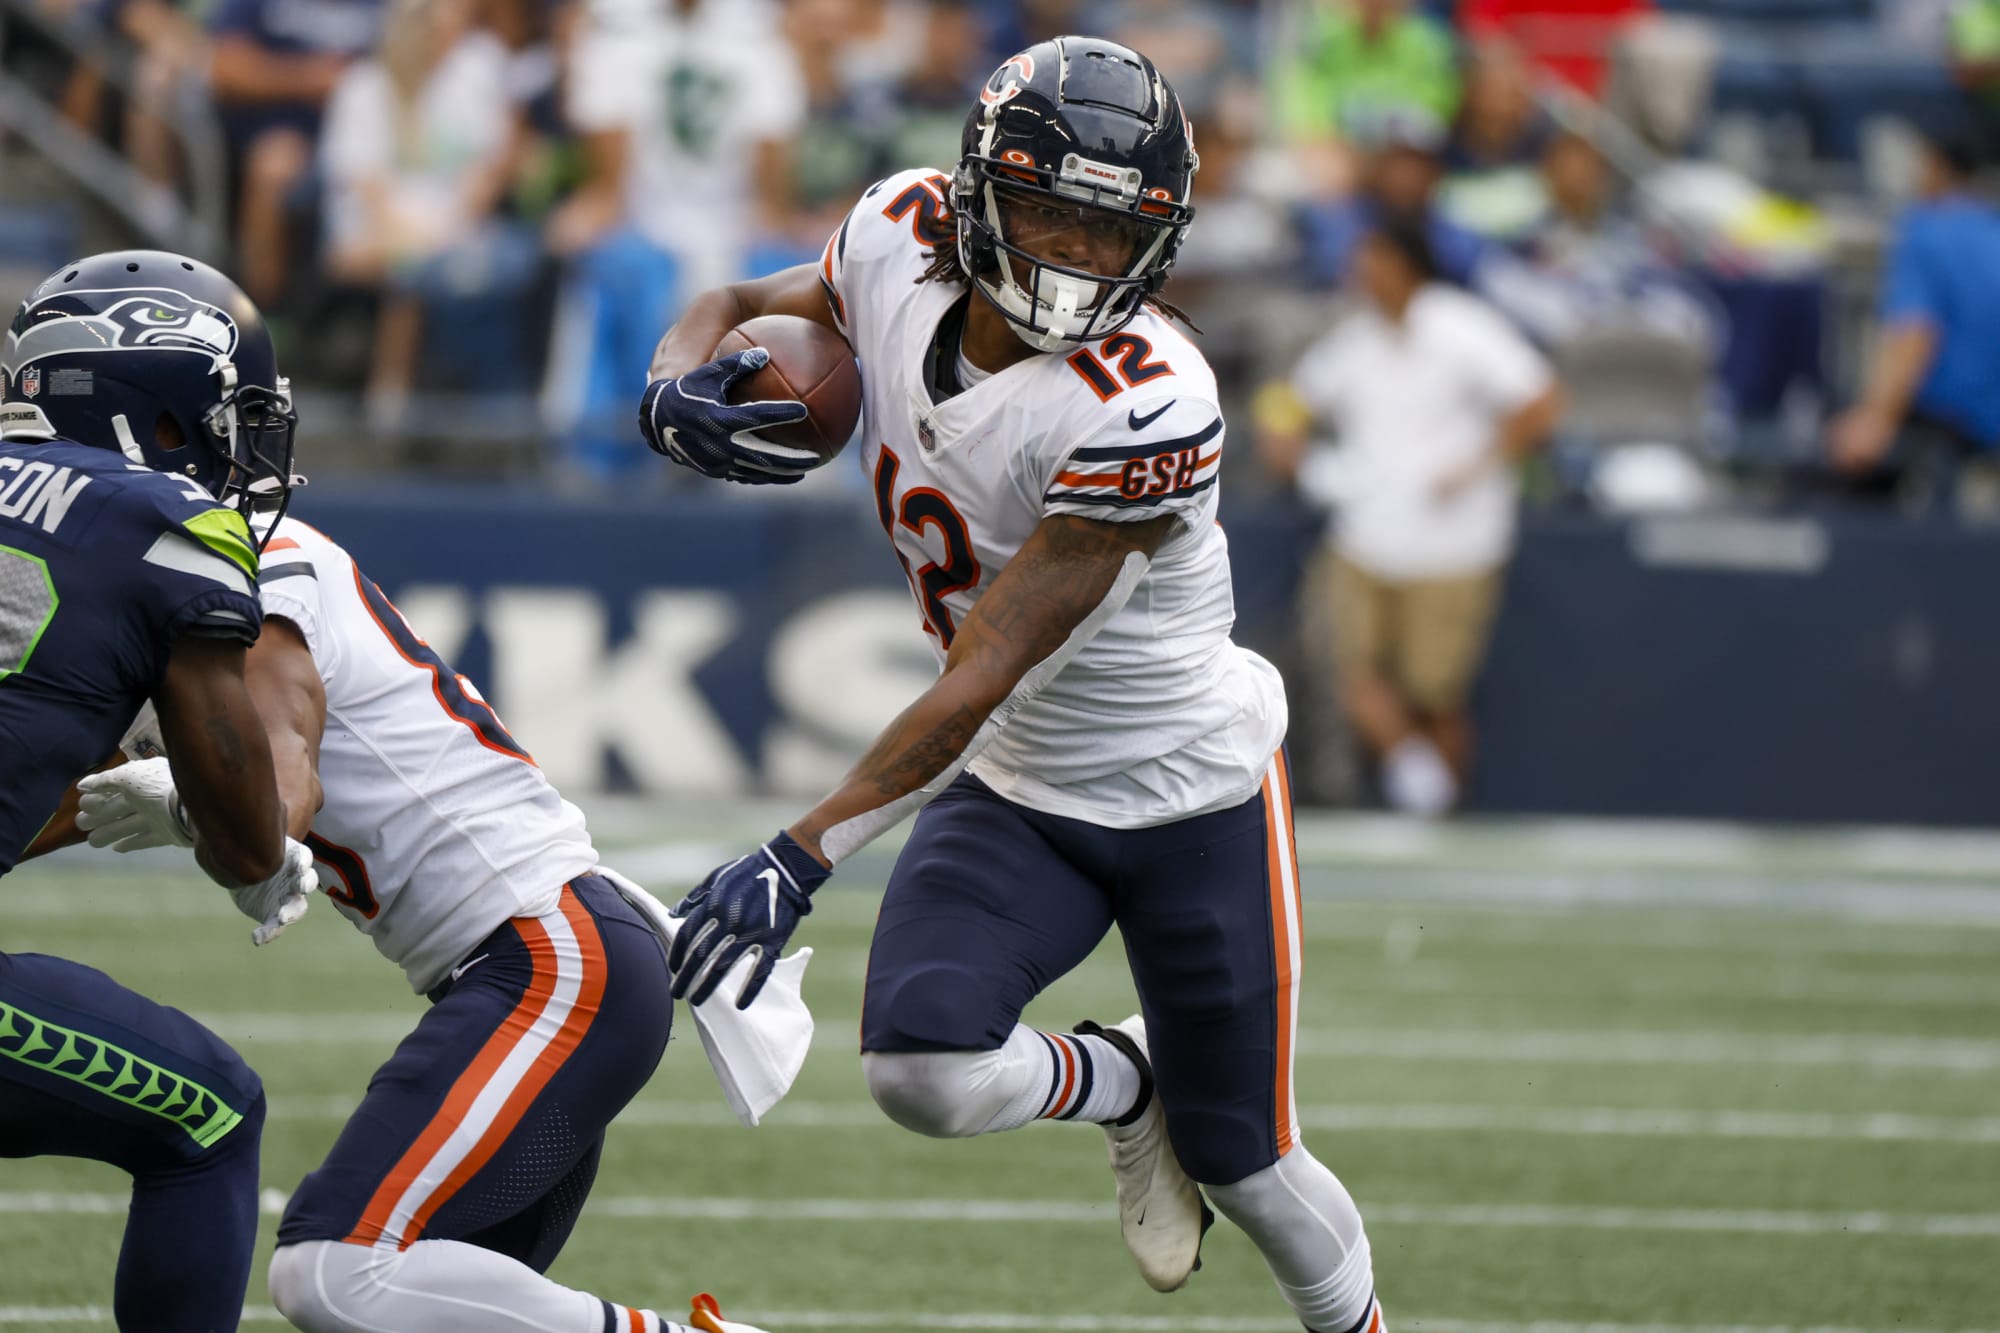 The Chicago Bears look to be getting a new offensive weapon vs Giants